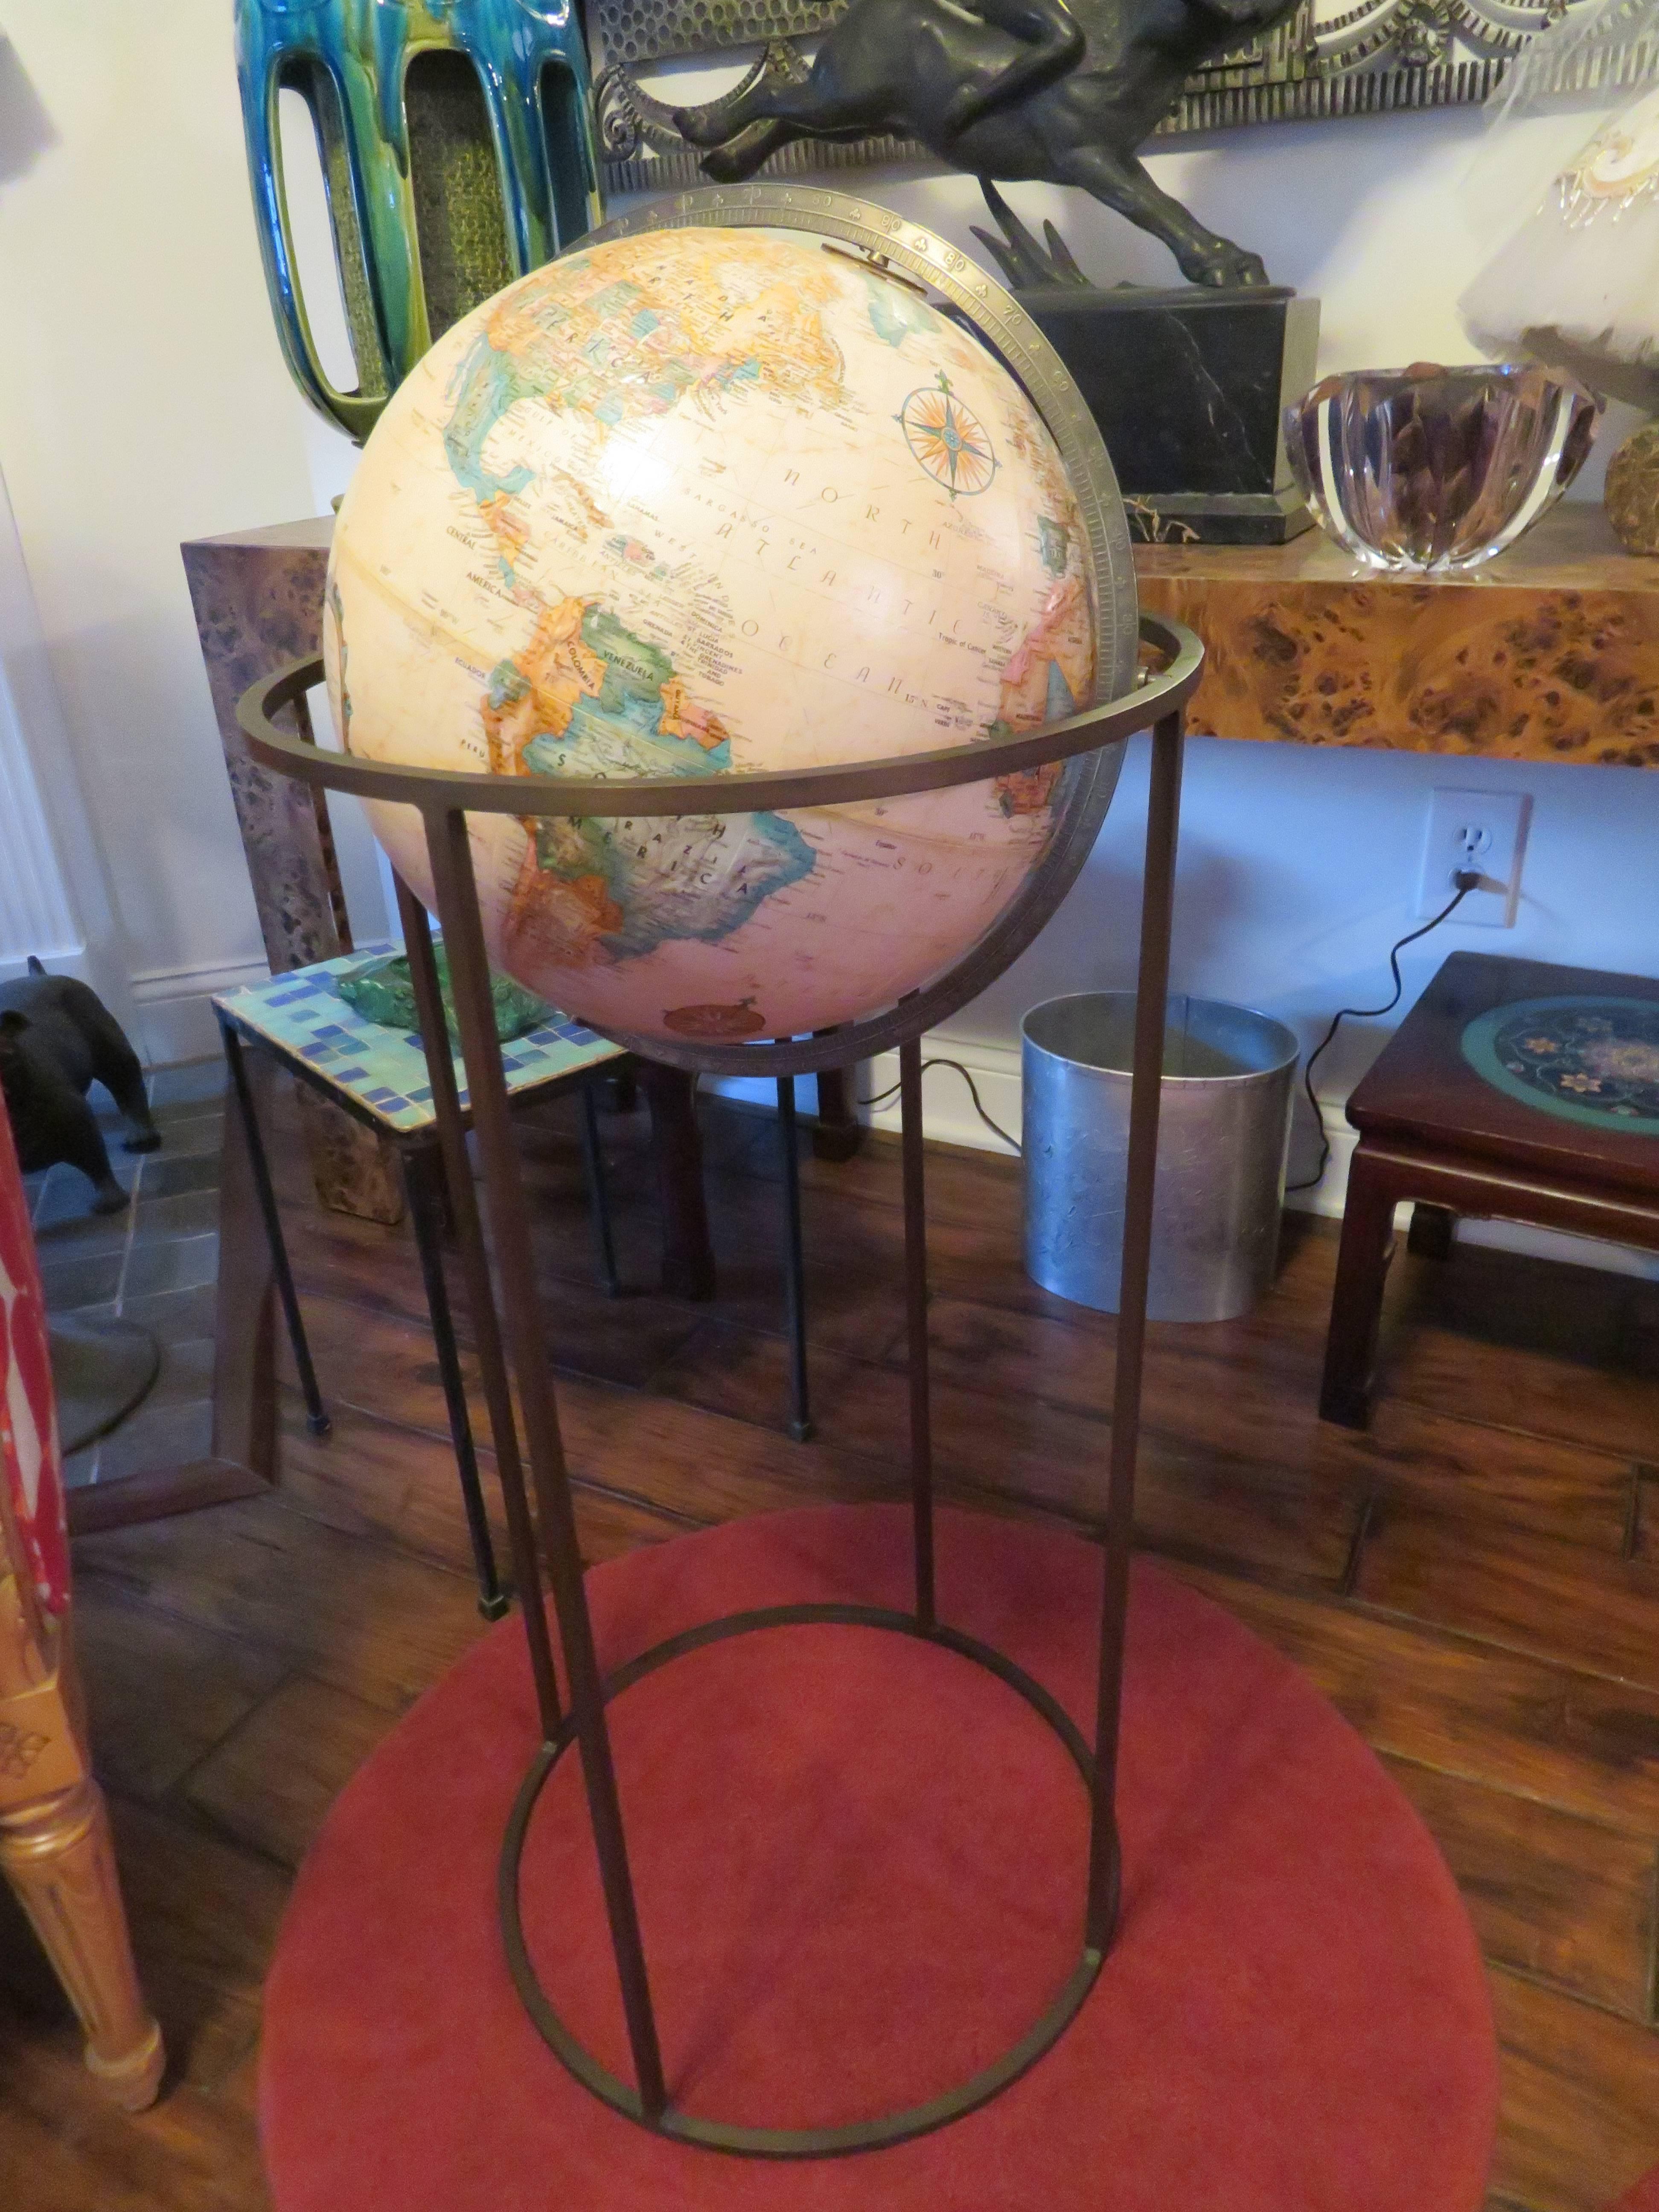 Fabulous Paul Mccobb style brass globe by Replogle.  We love the smaller size of this being a 12